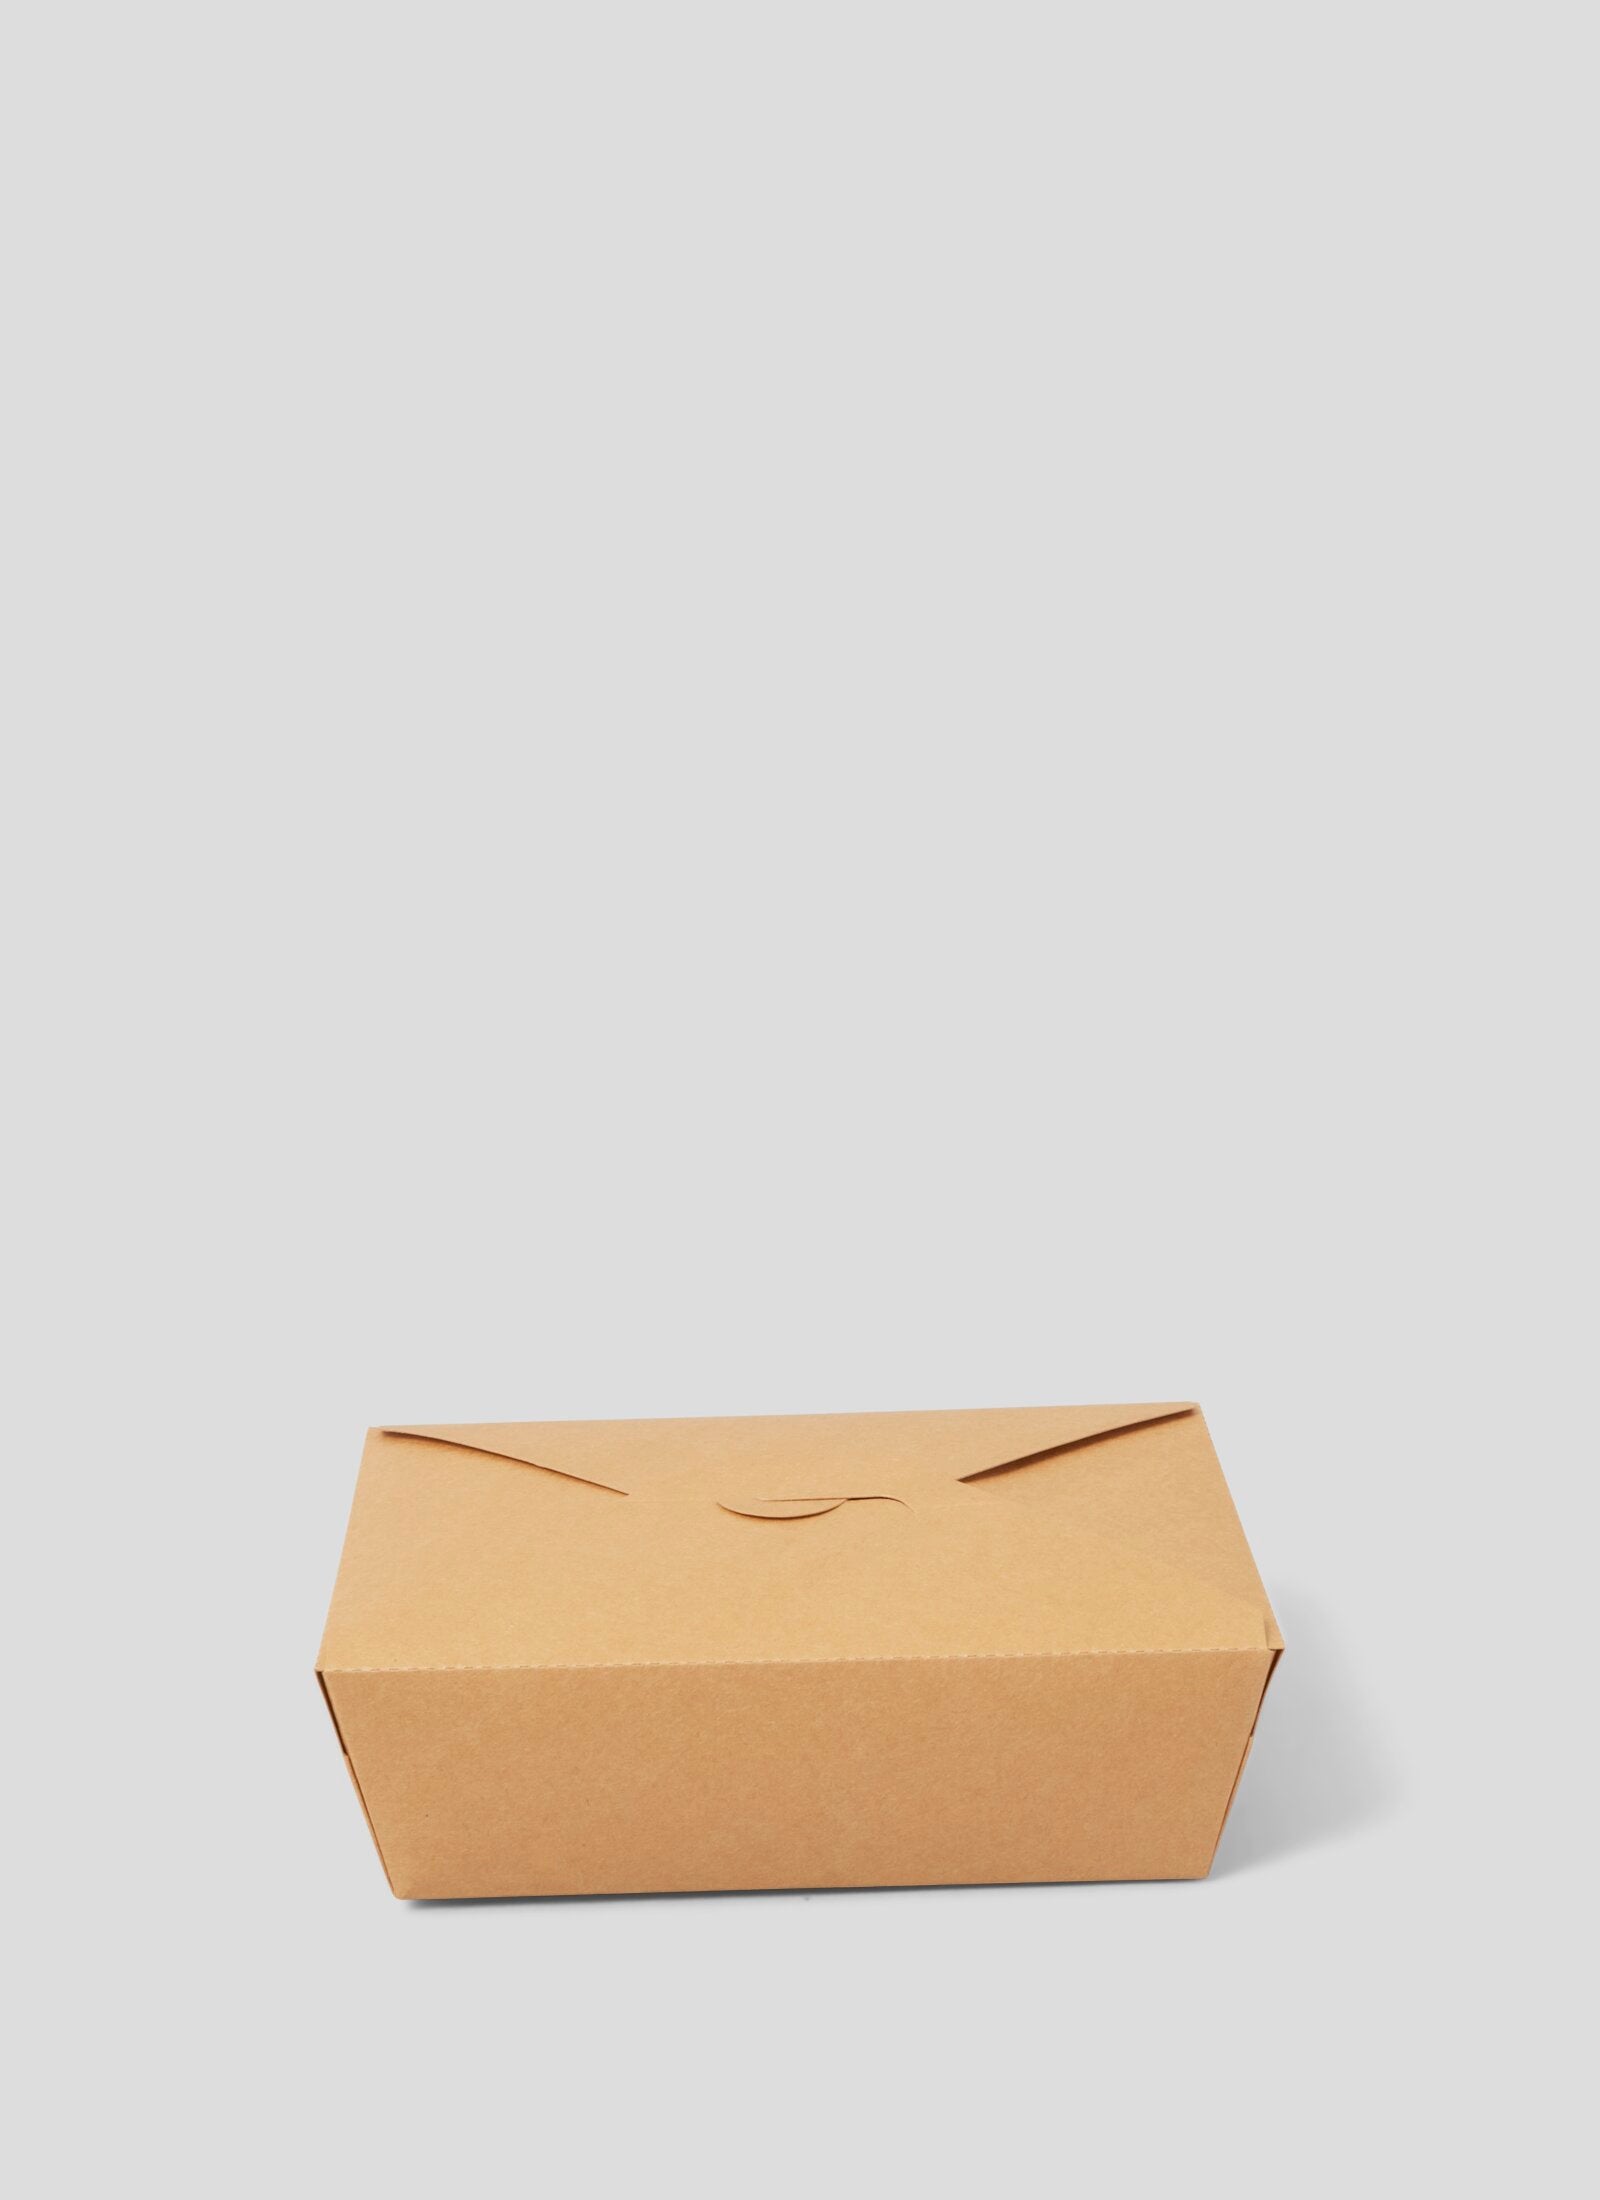 Lid CLosed Bento Box Sustainable Packaging